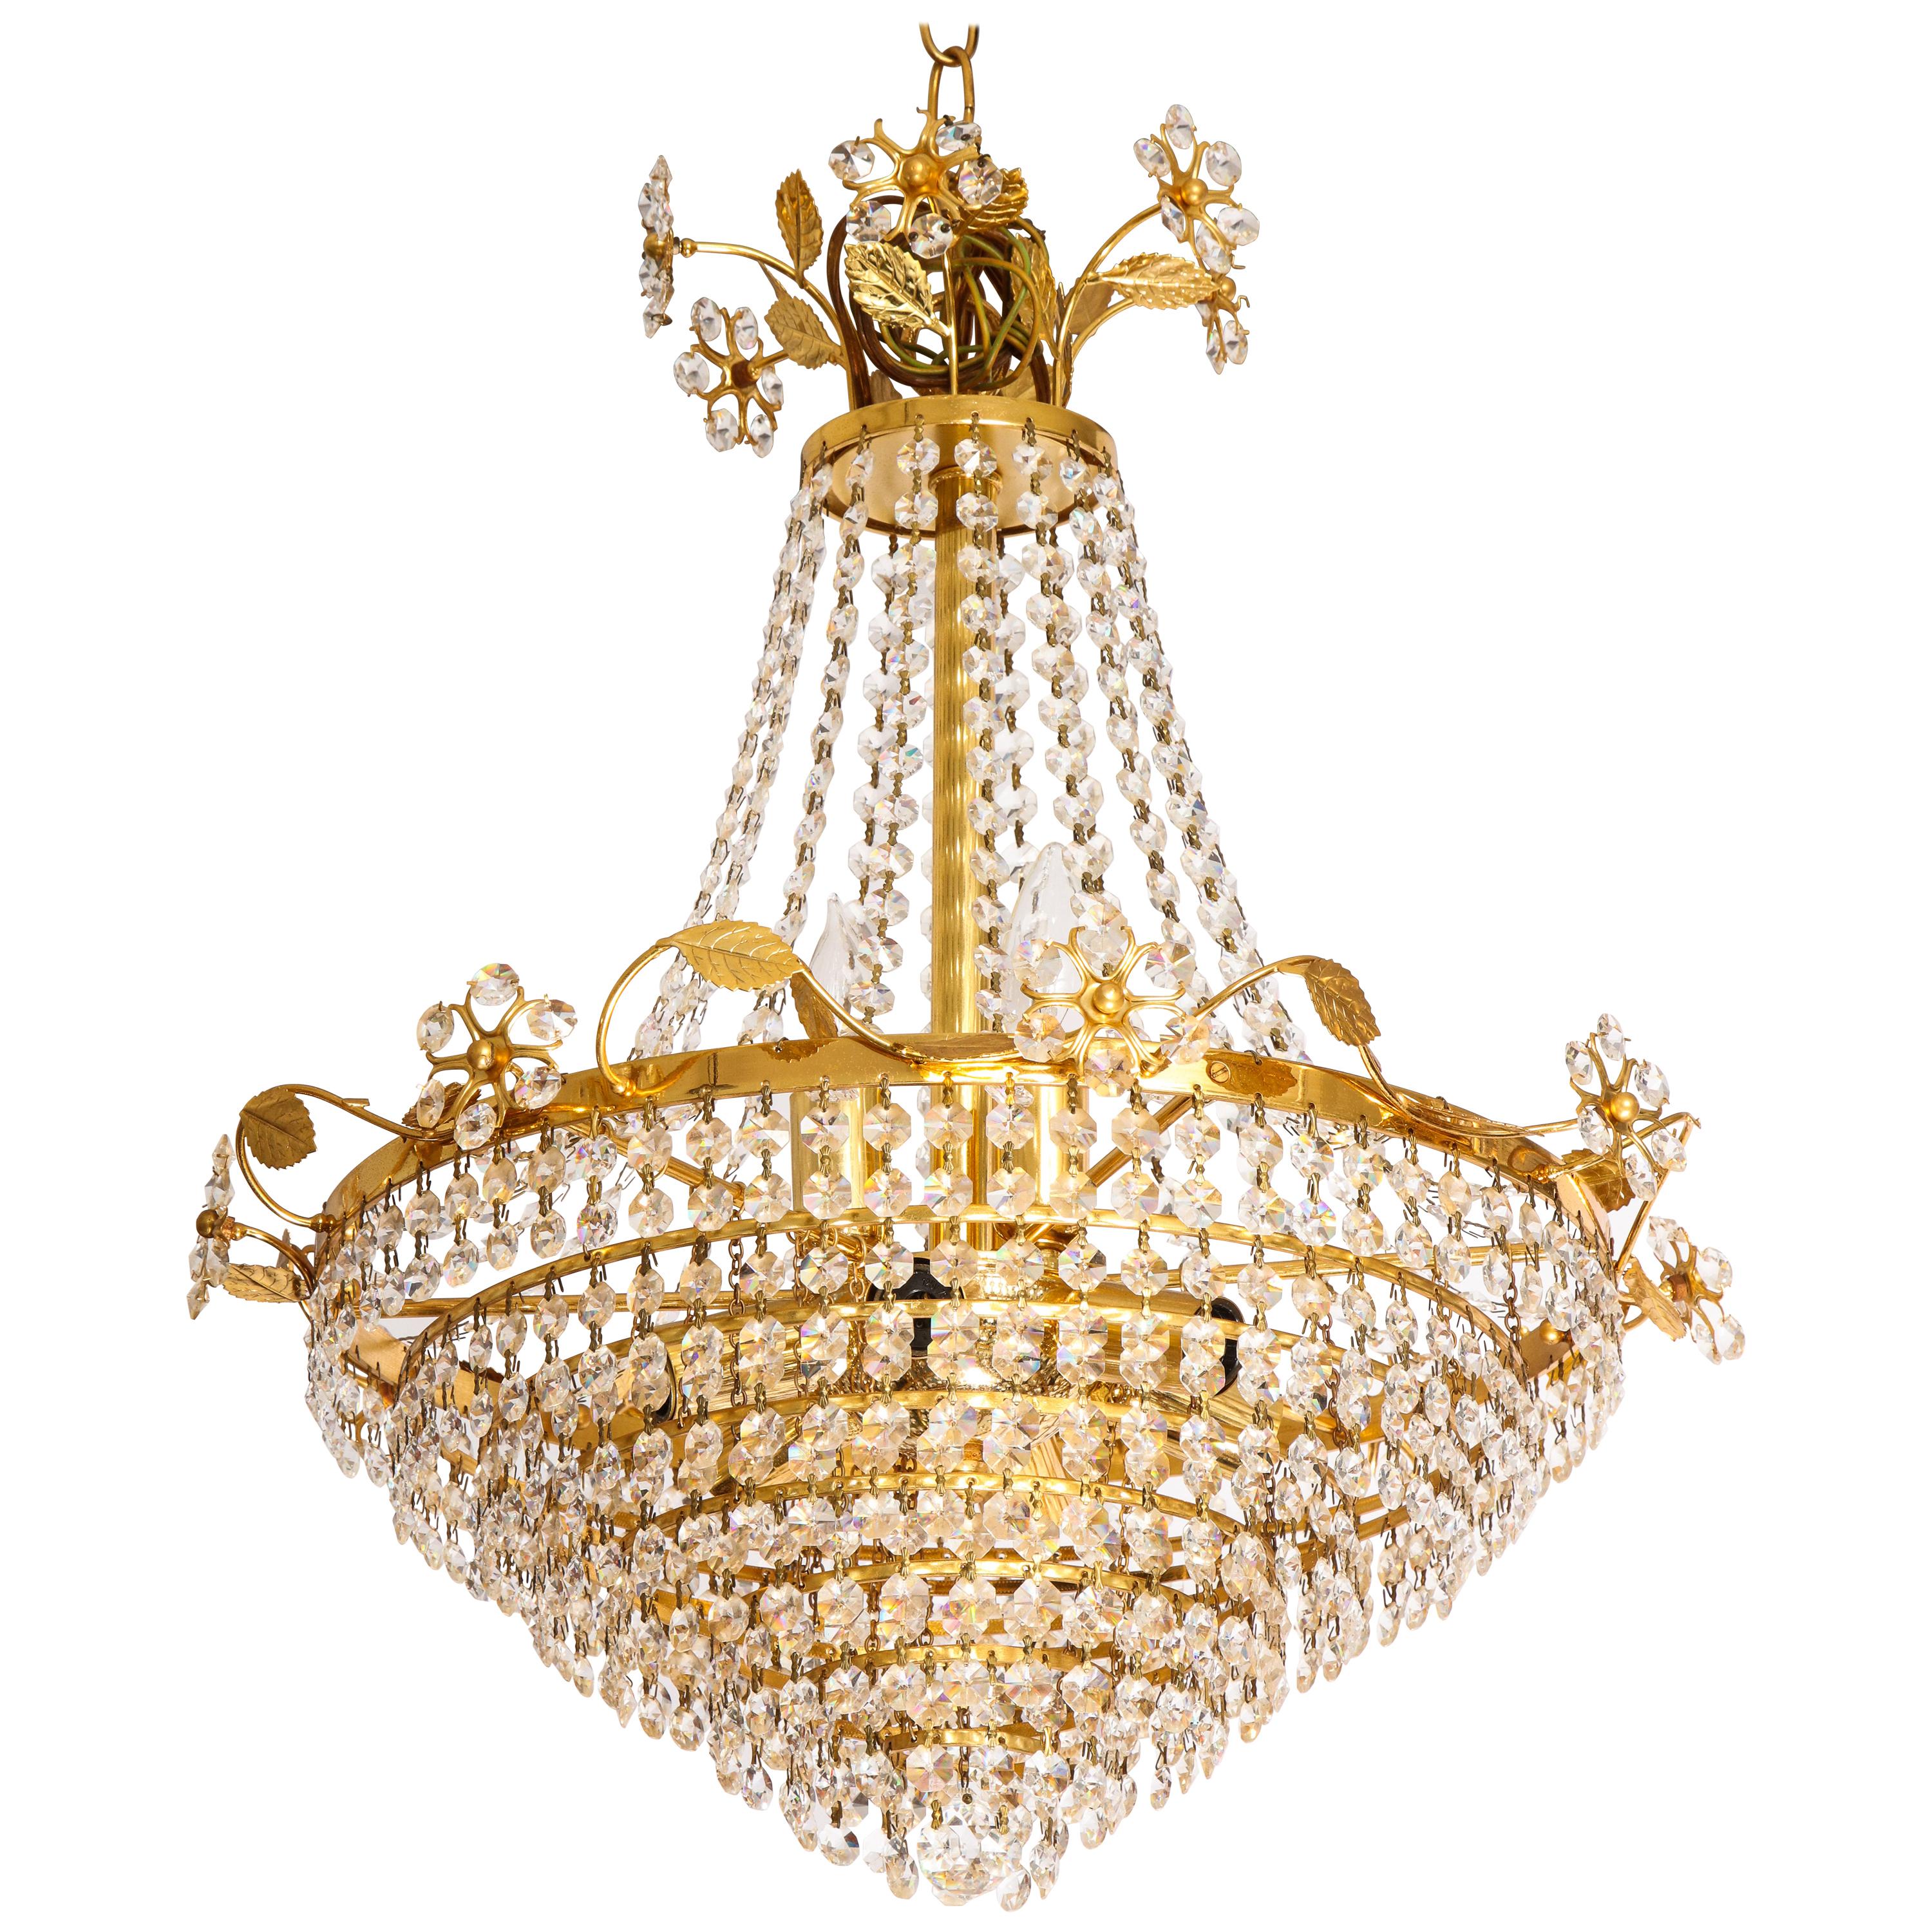 Tiered crystal and brass chandelier with flowers, vines and leaves by Palwa For Sale